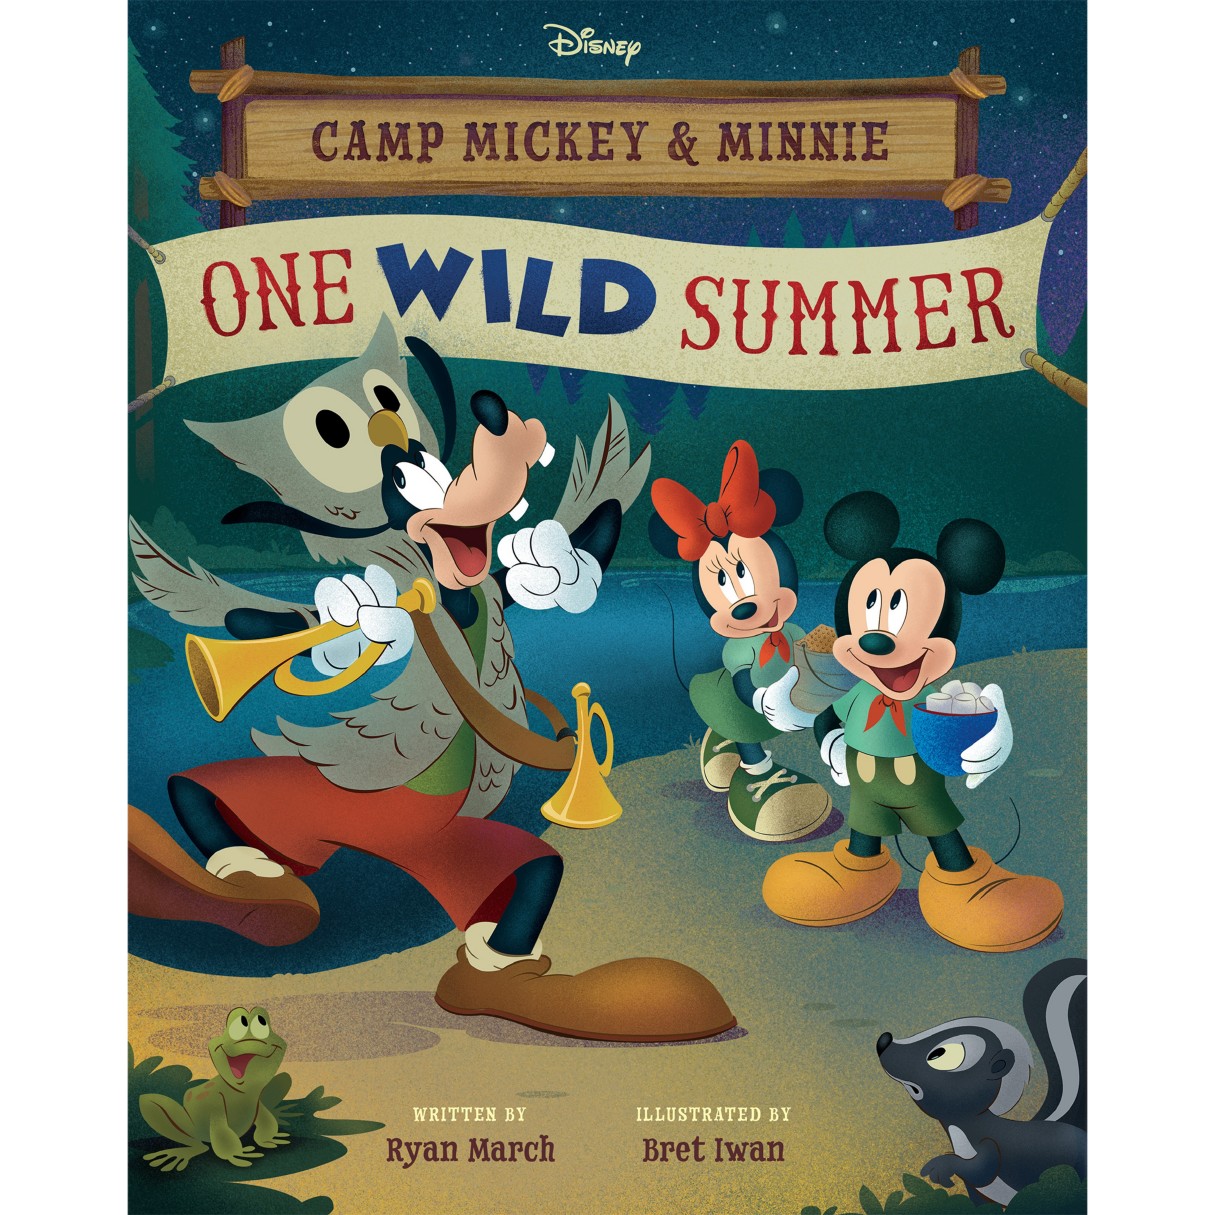 Camp Mickey and Minnie: One Wild Summer Book